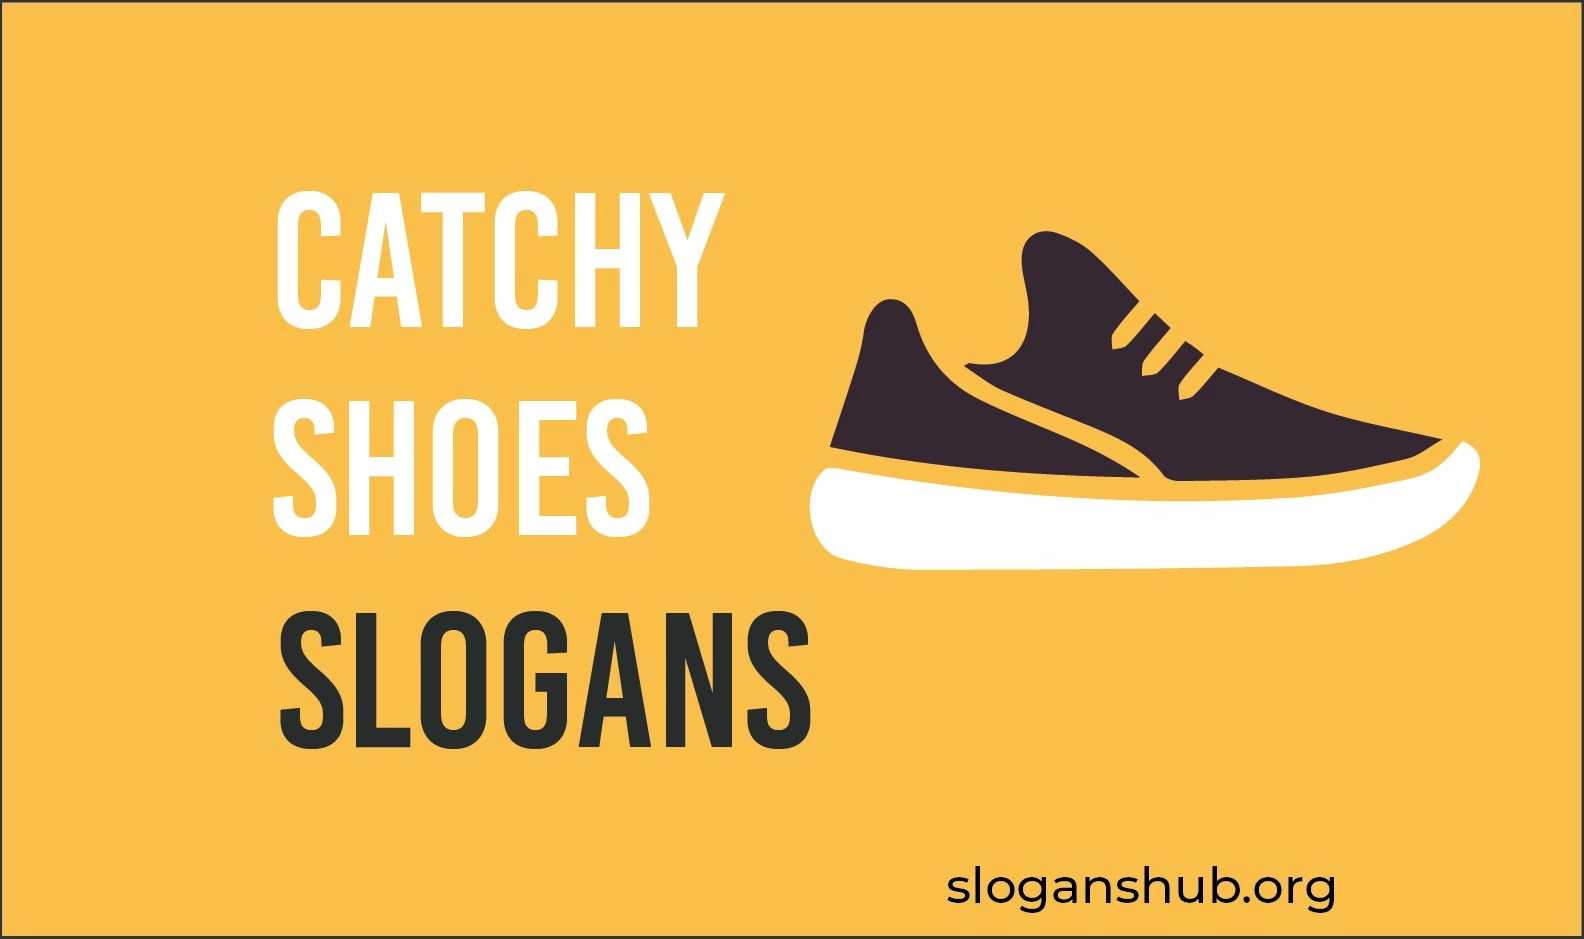 100 Catchy Shoes Slogans and Best Taglines